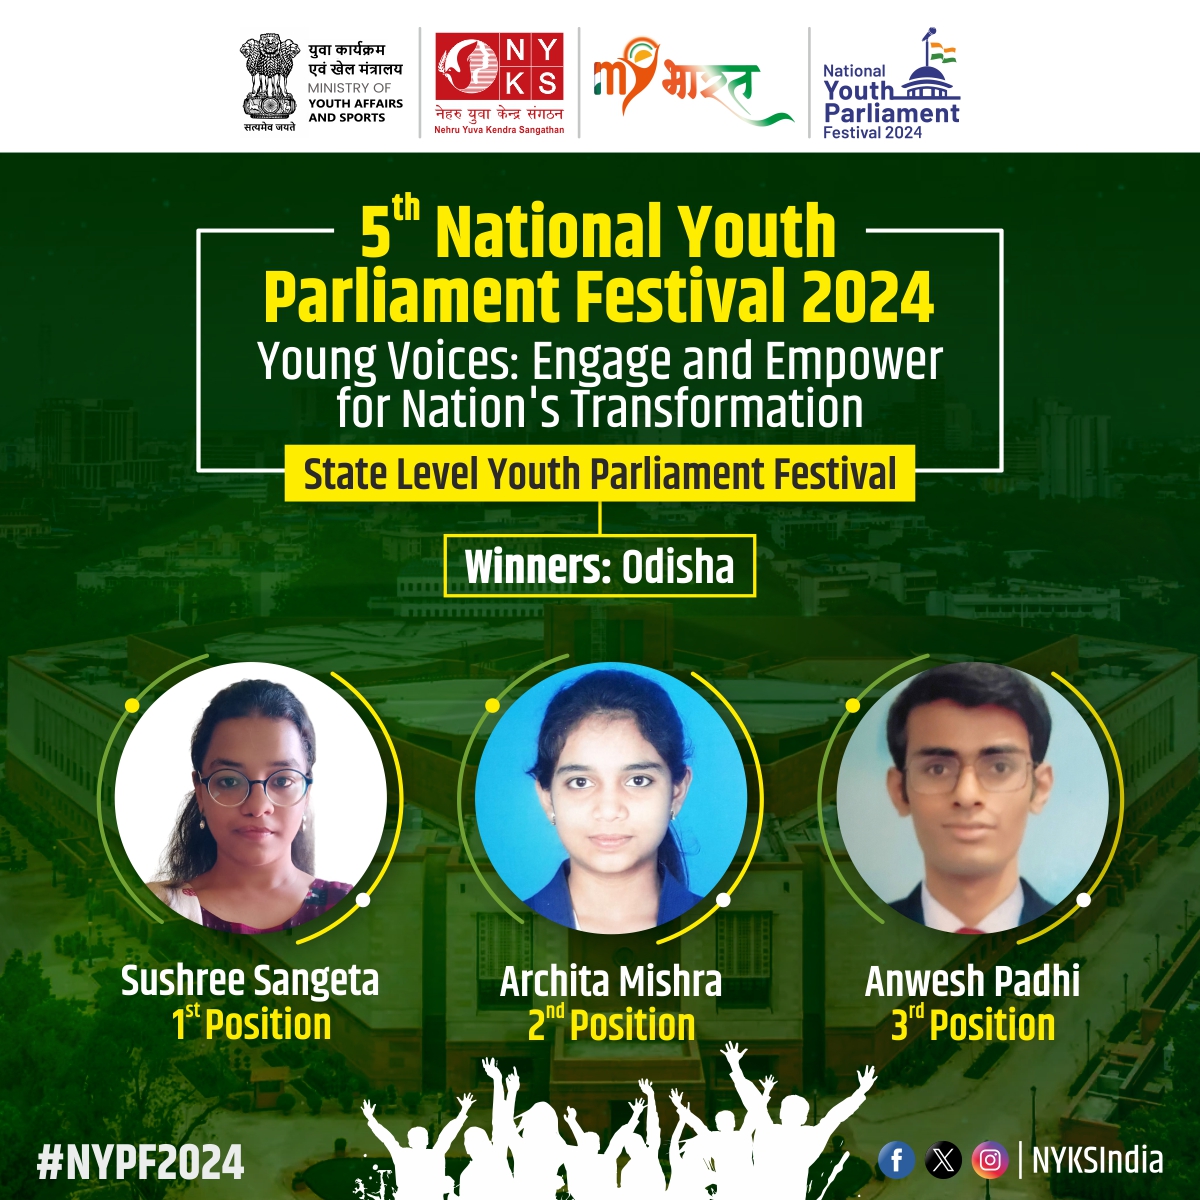 🏆 Celebrating excellence! Congratulations to the winners of the State Level Youth Parliament Festival 2024 from #Odisha. Best wishes as you represent Odisha on the national stage at the #NYPF2024. #Youth #YouthEmpowerment #NYKS